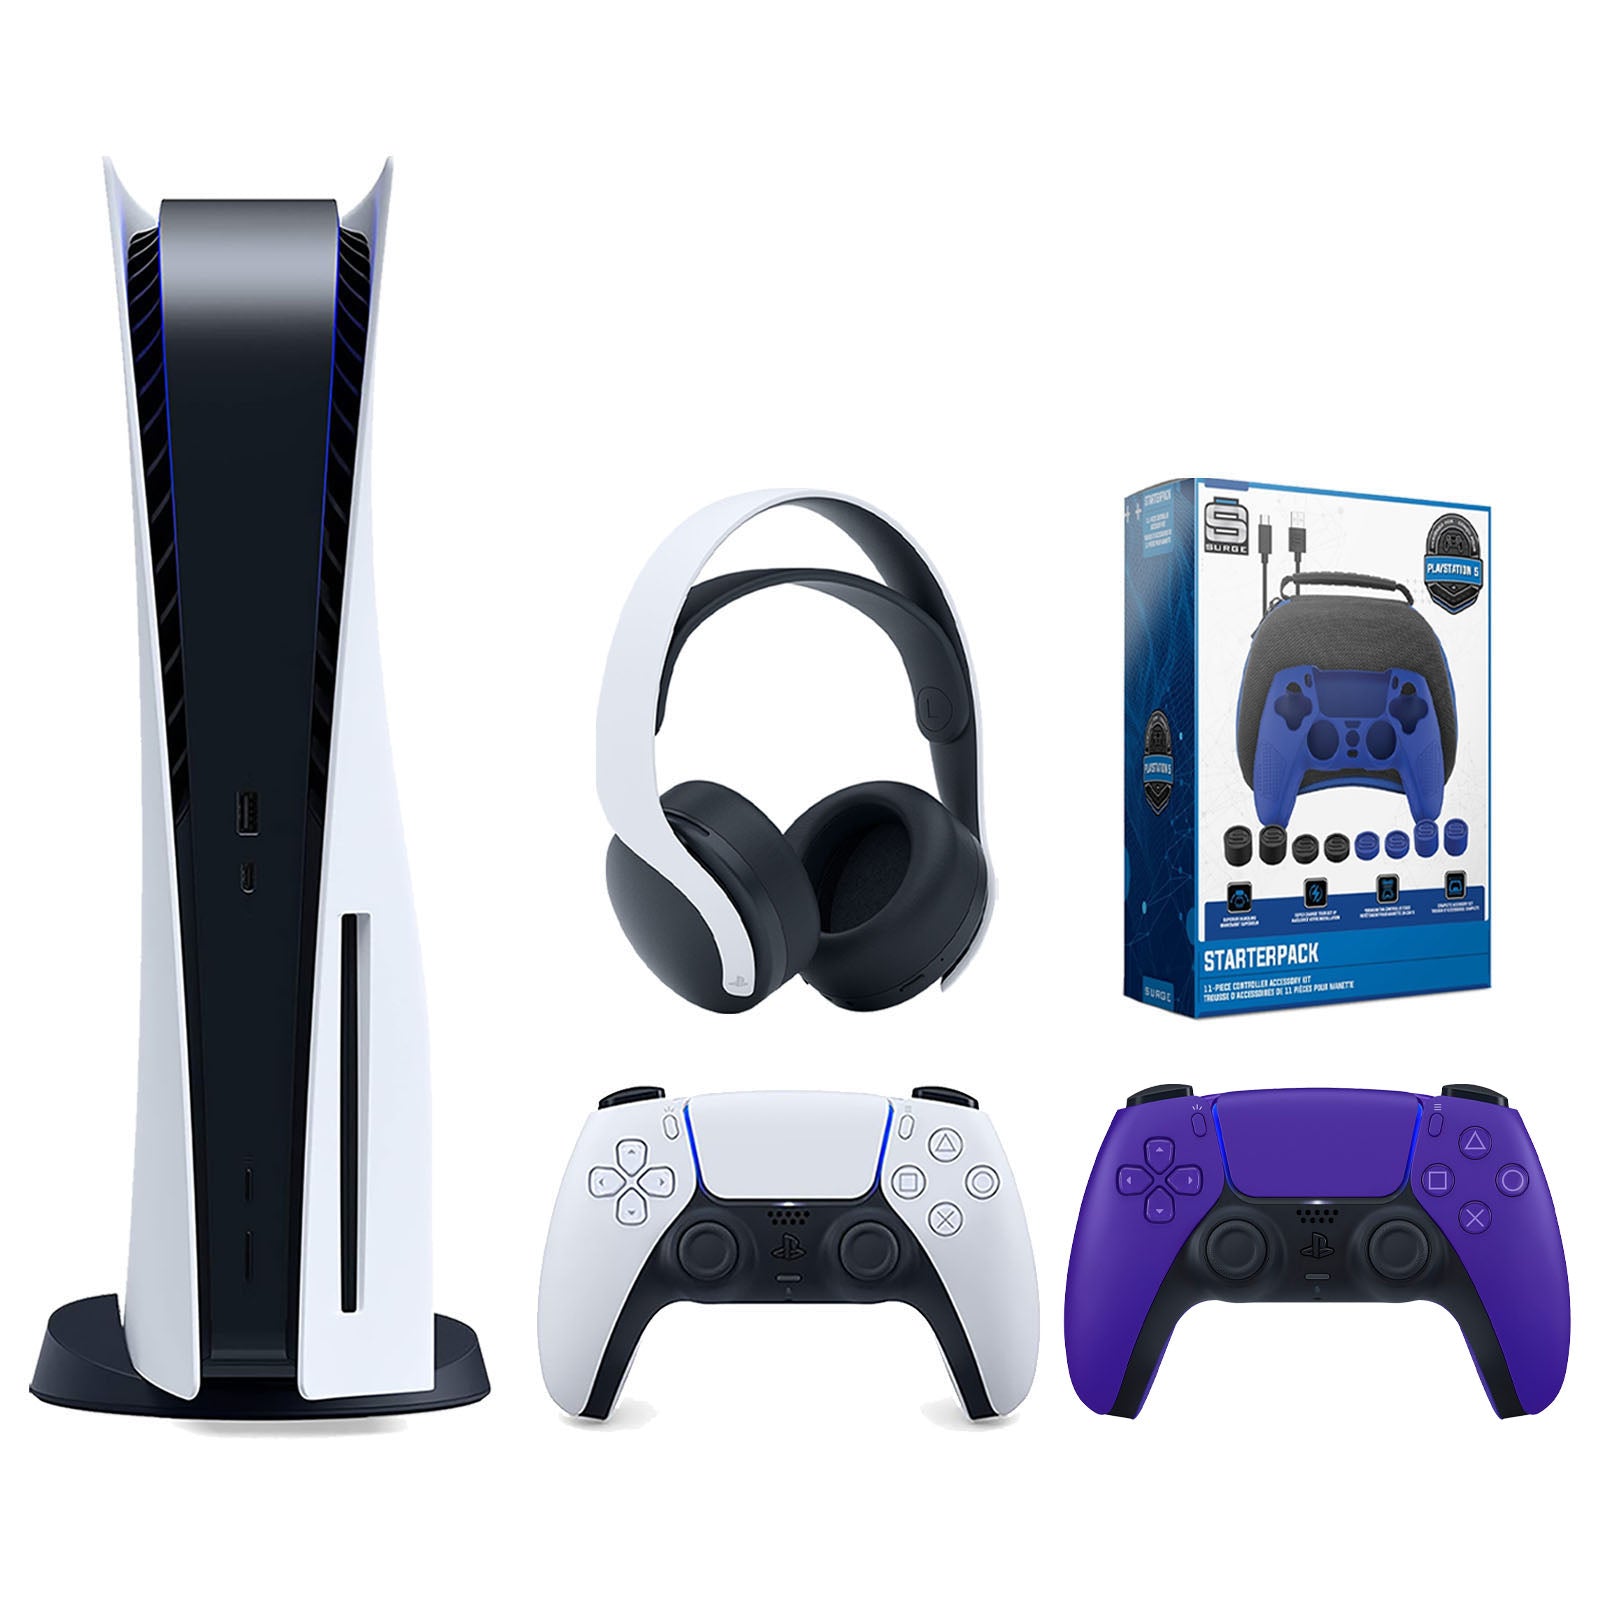 Sony Playstation 5 Disc Version Console with Extra Purple Controller, White PULSE 3D Headset and Surge Pro Gamer Starter Pack 11-Piece Accessory Bundle - Pro-Distributing